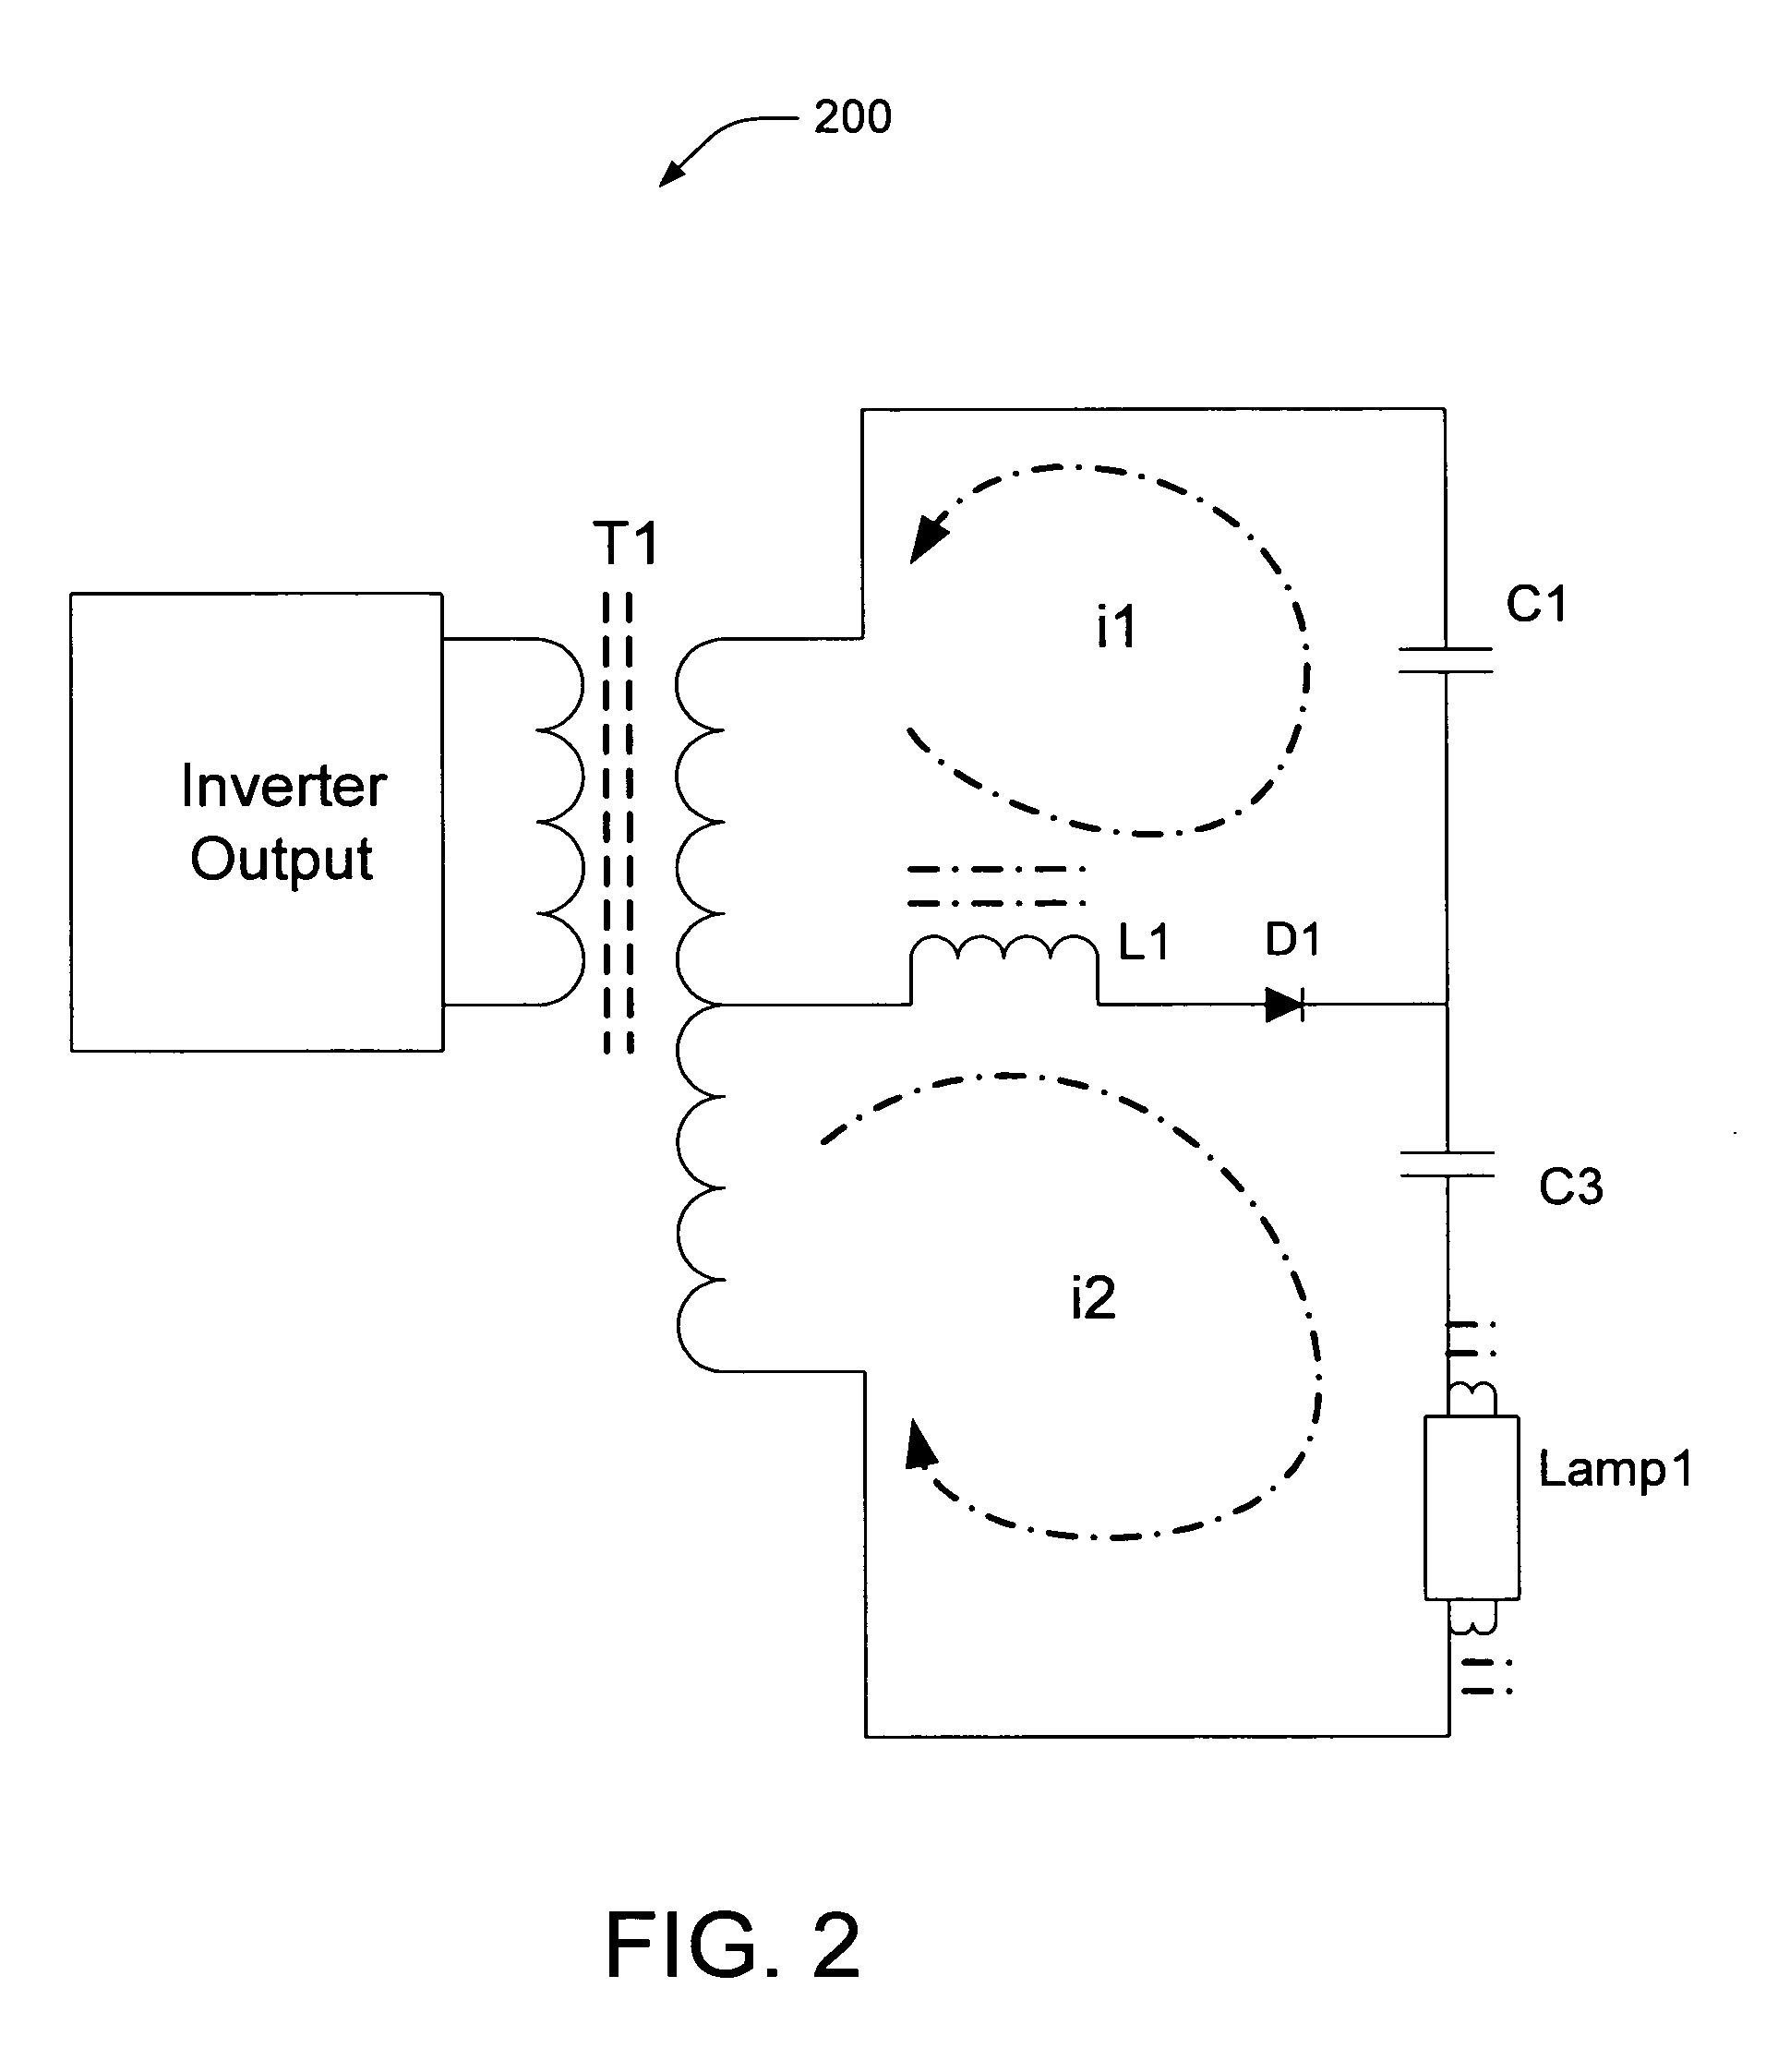 Single point sensing for end of lamp life, anti-arcing, and no-load protection for electronic ballast